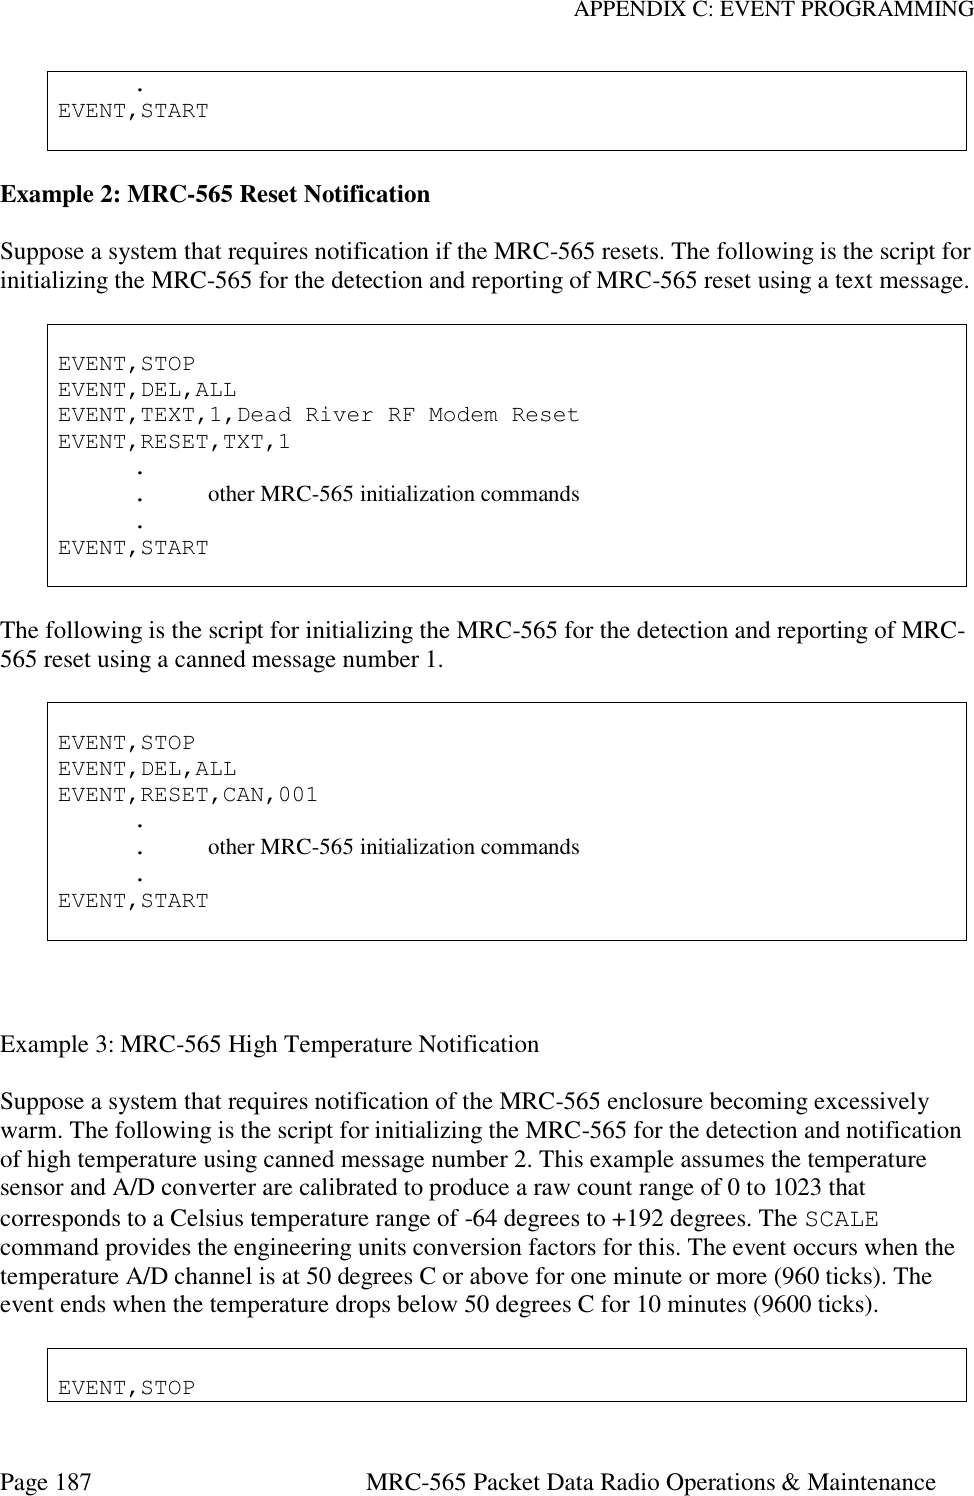 APPENDIX C: EVENT PROGRAMMING Page 187  MRC-565 Packet Data Radio Operations &amp; Maintenance   . EVENT,START   Example 2: MRC-565 Reset Notification  Suppose a system that requires notification if the MRC-565 resets. The following is the script for initializing the MRC-565 for the detection and reporting of MRC-565 reset using a text message.   EVENT,STOP EVENT,DEL,ALL EVENT,TEXT,1,Dead River RF Modem Reset EVENT,RESET,TXT,1   .   .  other MRC-565 initialization commands   . EVENT,START   The following is the script for initializing the MRC-565 for the detection and reporting of MRC-565 reset using a canned message number 1.   EVENT,STOP EVENT,DEL,ALL EVENT,RESET,CAN,001   .   .  other MRC-565 initialization commands   . EVENT,START    Example 3: MRC-565 High Temperature Notification  Suppose a system that requires notification of the MRC-565 enclosure becoming excessively warm. The following is the script for initializing the MRC-565 for the detection and notification of high temperature using canned message number 2. This example assumes the temperature sensor and A/D converter are calibrated to produce a raw count range of 0 to 1023 that corresponds to a Celsius temperature range of -64 degrees to +192 degrees. The SCALE command provides the engineering units conversion factors for this. The event occurs when the temperature A/D channel is at 50 degrees C or above for one minute or more (960 ticks). The event ends when the temperature drops below 50 degrees C for 10 minutes (9600 ticks).   EVENT,STOP 